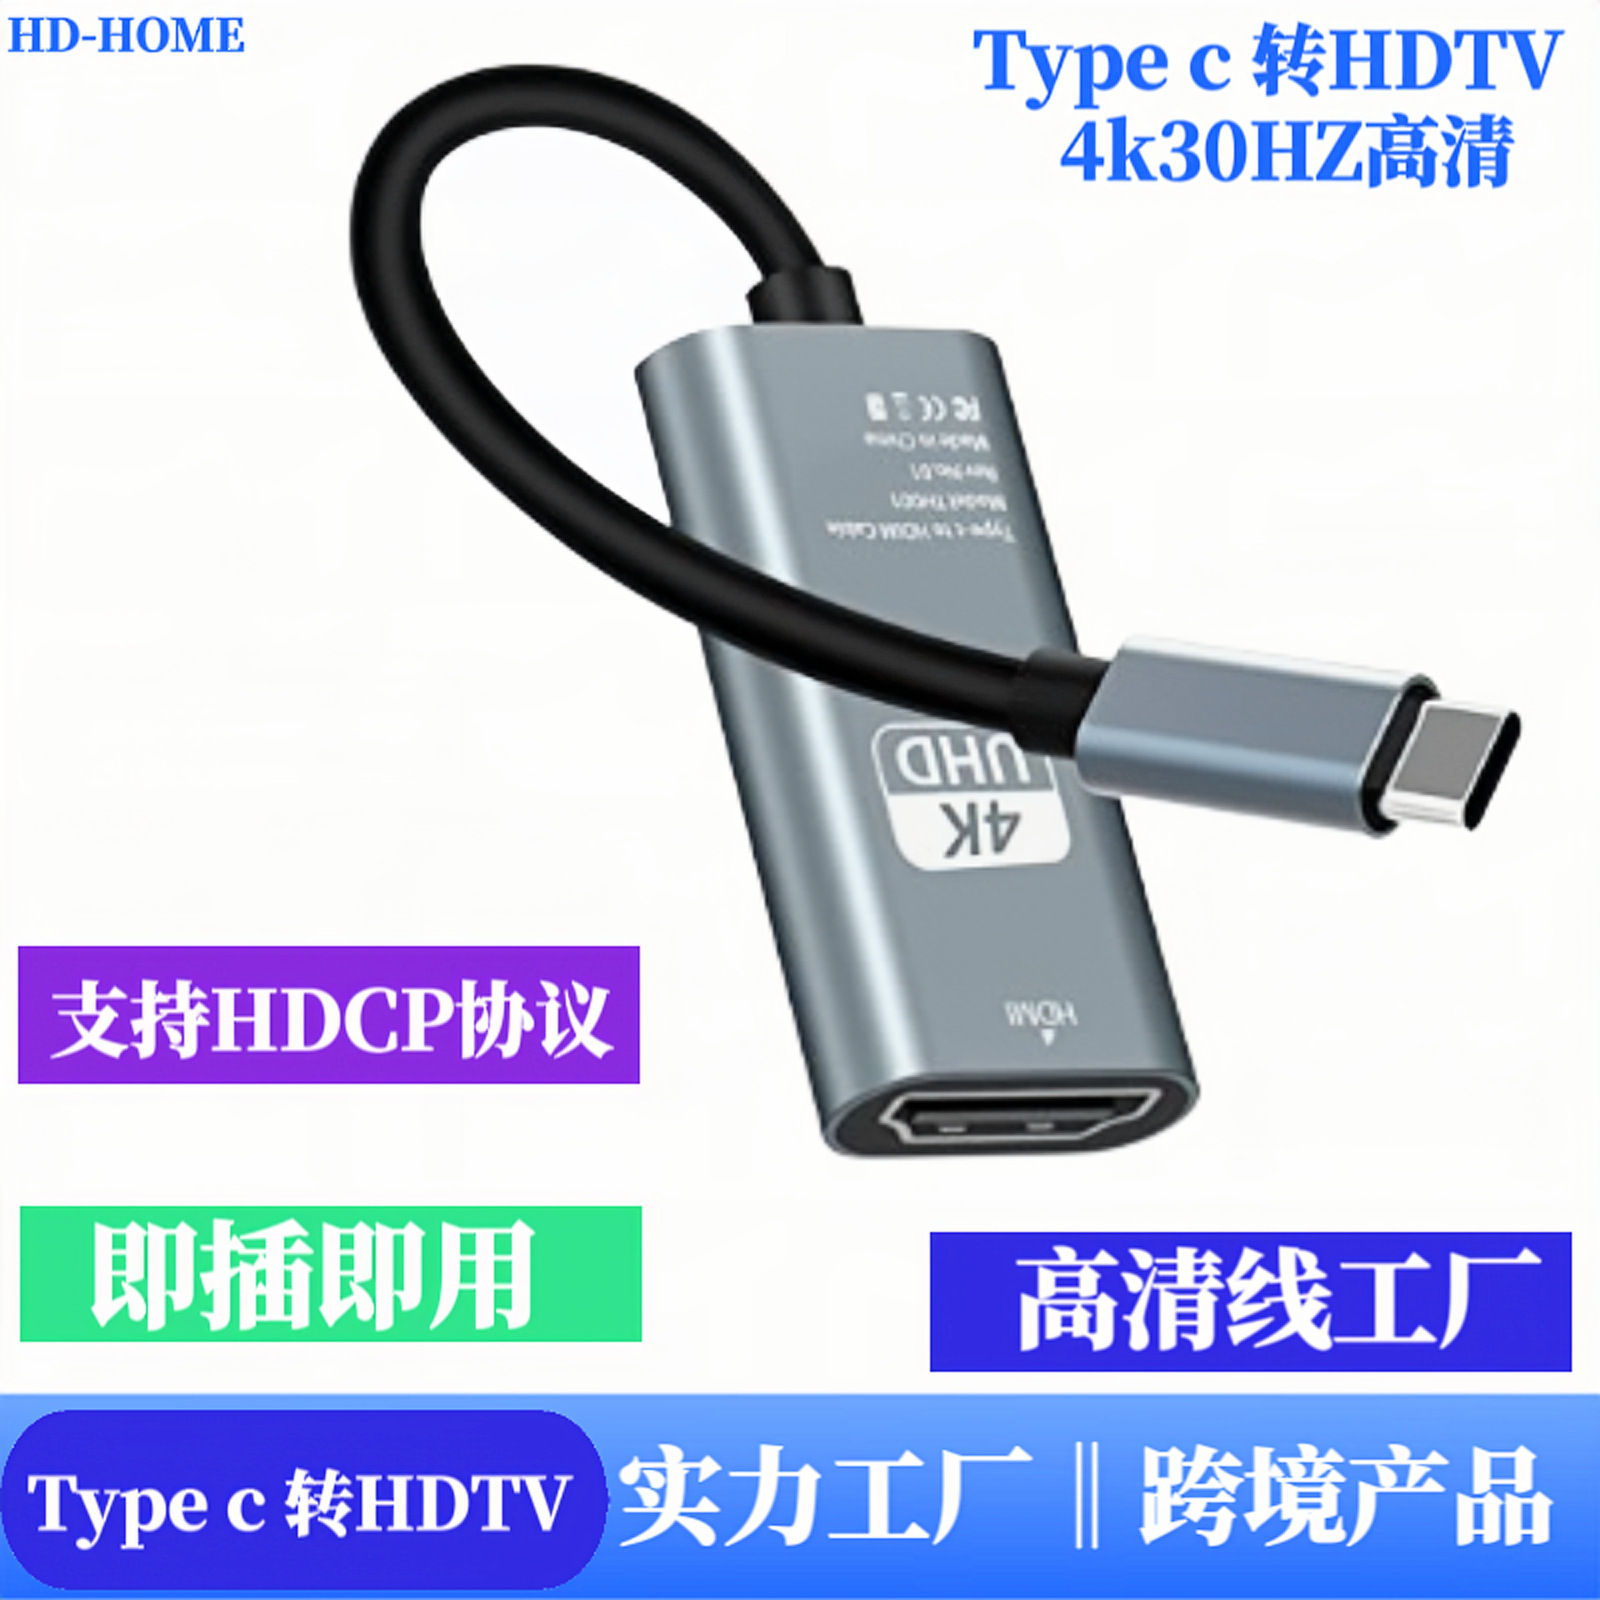 Mobile Phone Computer Same Screen HDMI Cable 4k30hz HD Projection Screen Adapter Cable Typec to HDMI Video Connector